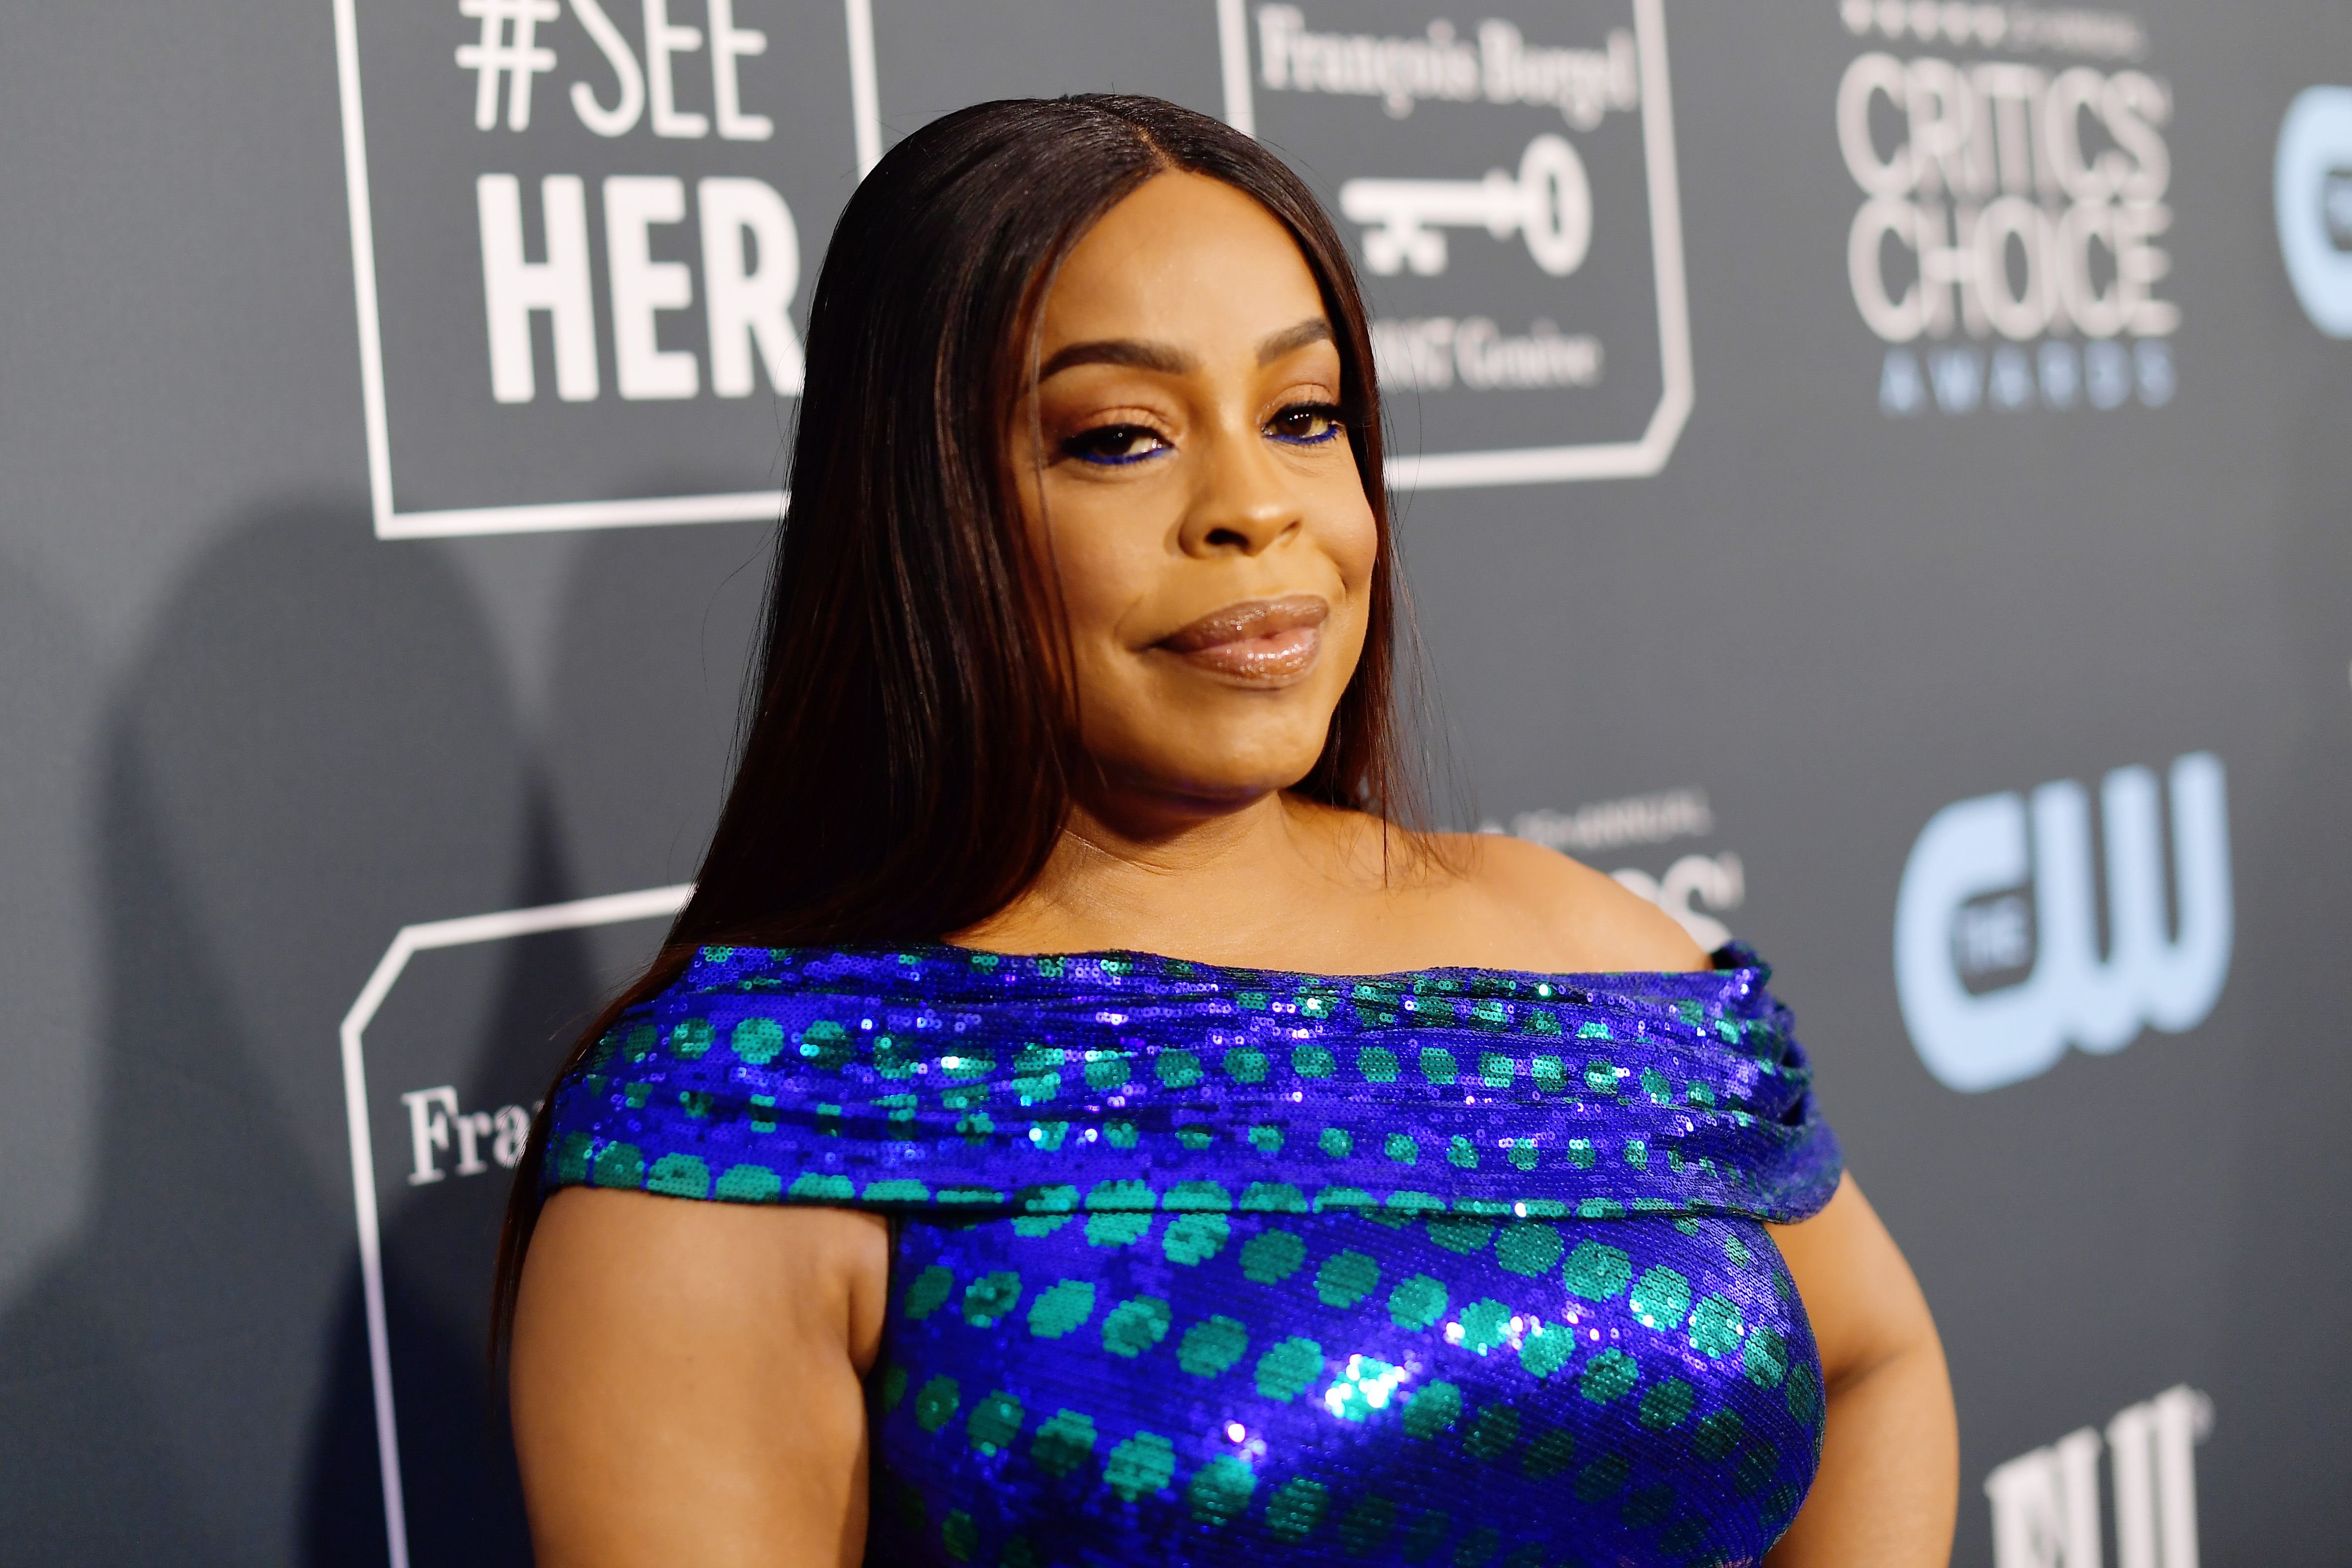 Niecy Nash at the Annual Critics' Choice Awards on January 12, 2020 in Santa Monica. | Photo: Getty Images